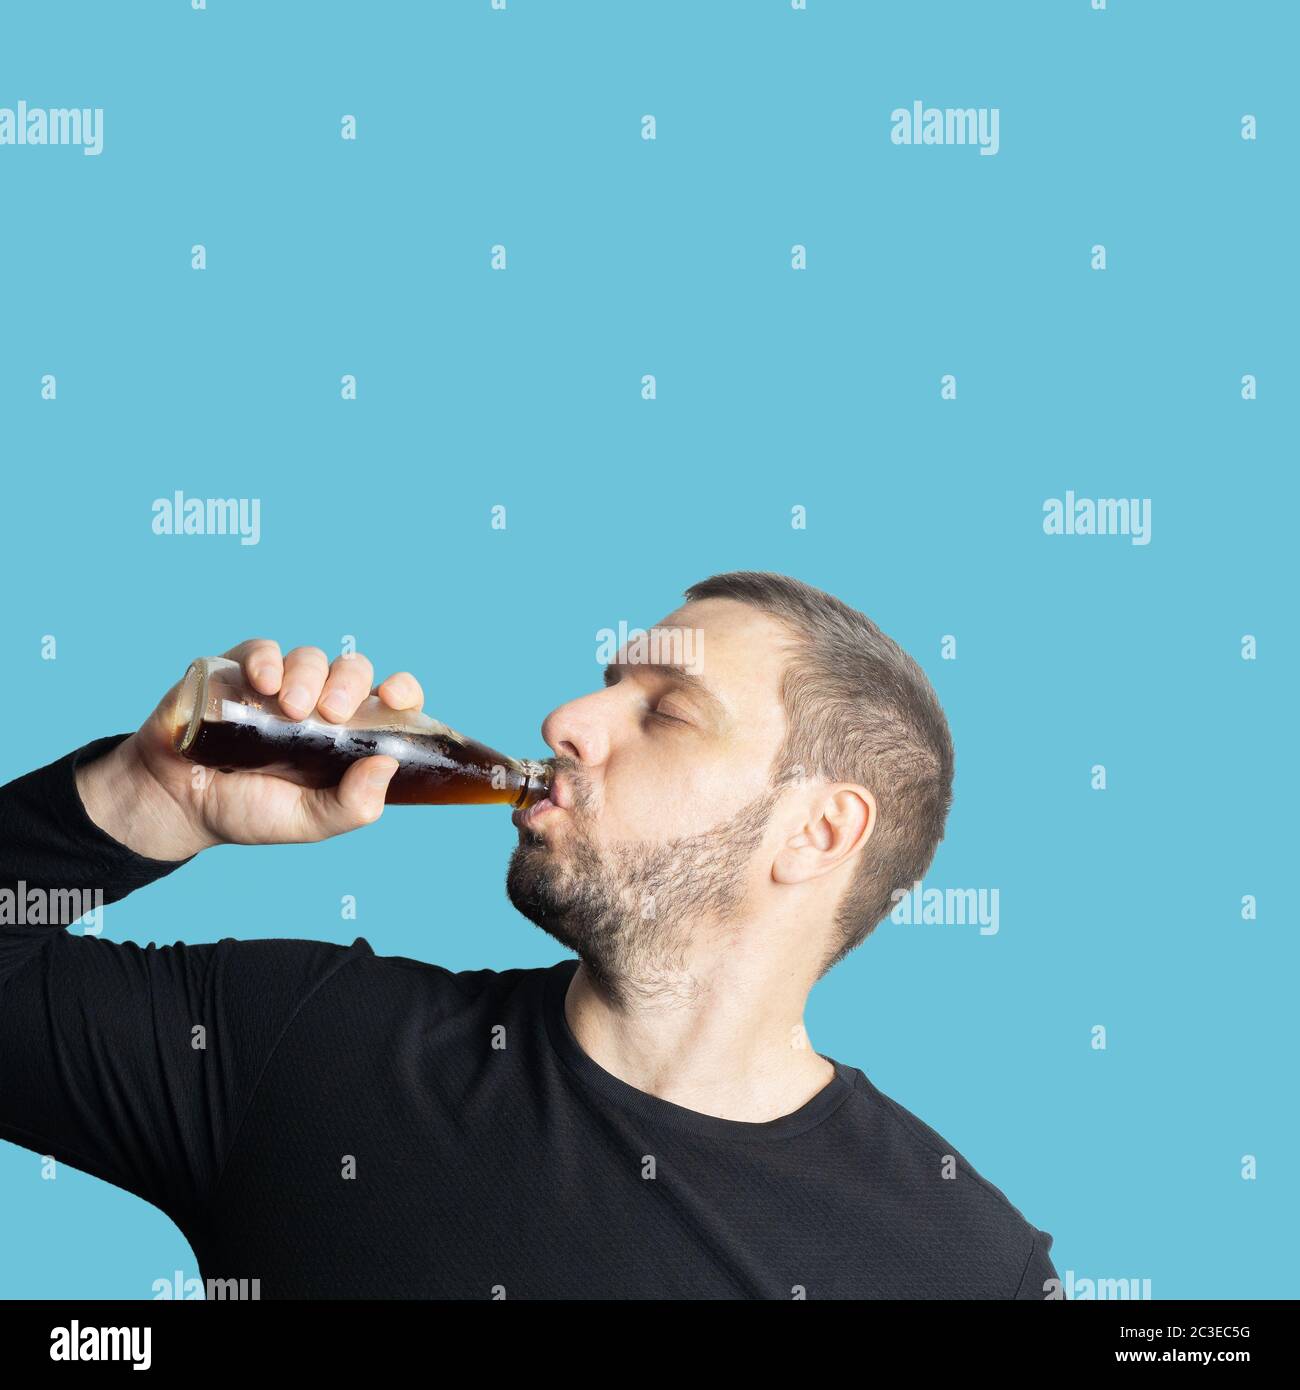 Dark-haired bearded man in dark clothes drinks a dark drink from a bottle with his eyes closed Stock Photo